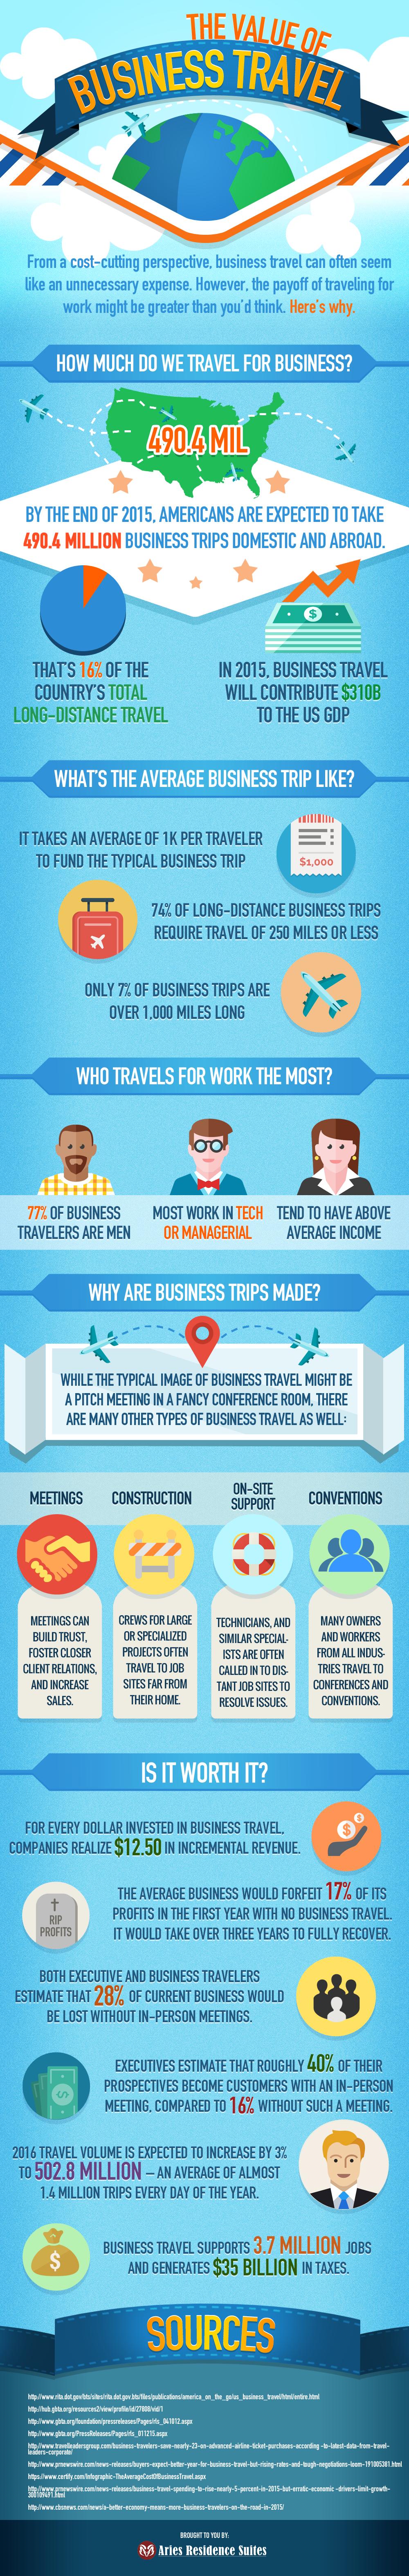 Value Of Business Travel